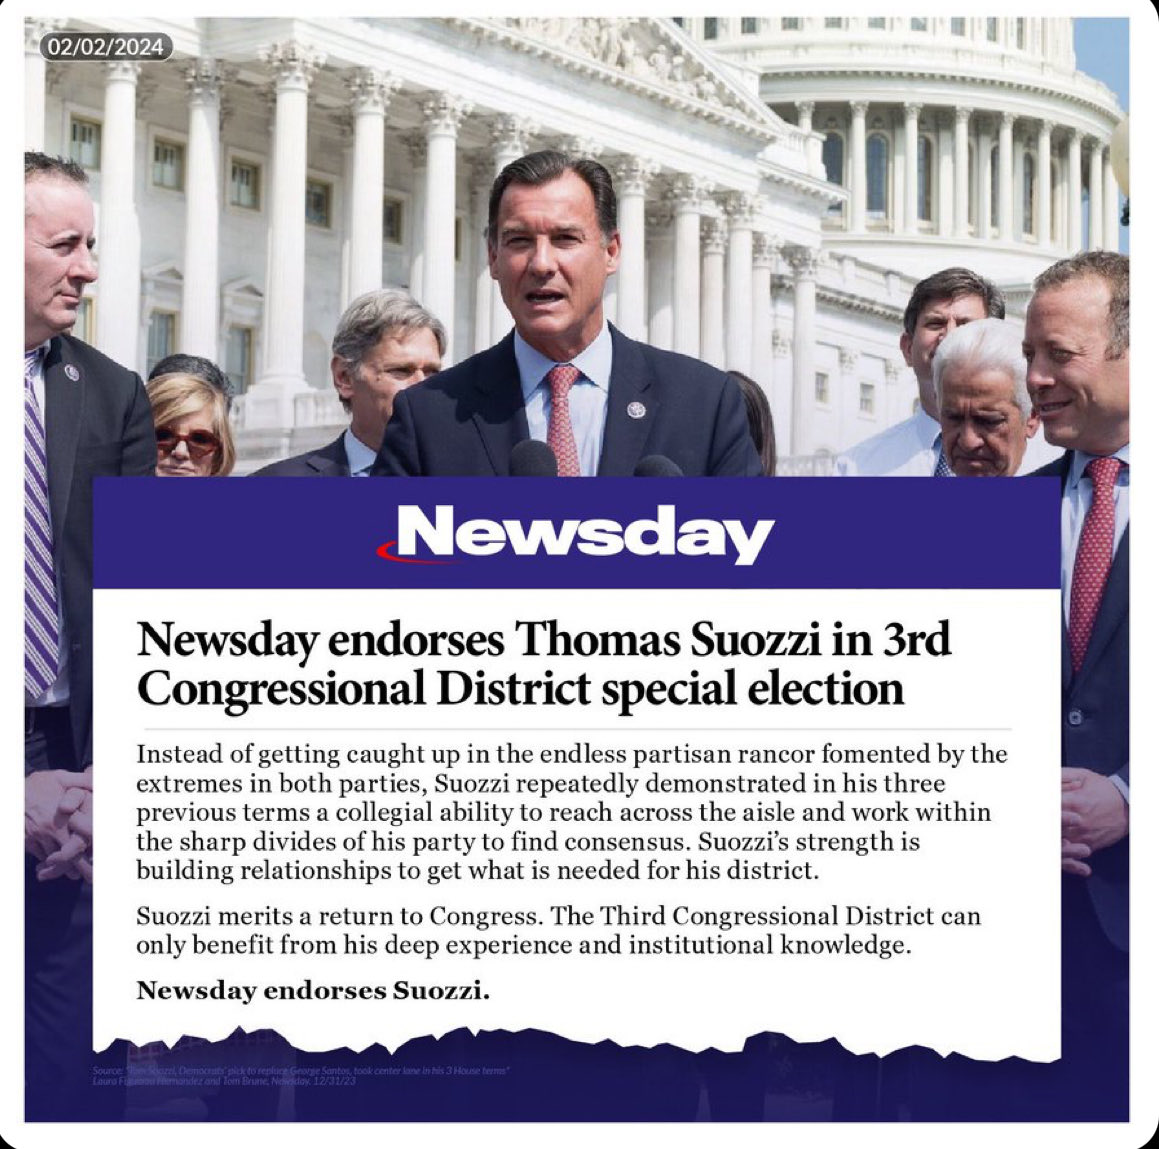 “Newsday's Resounding Endorsement: Tom Suozzi Triumphs Over Madi Phillips!”

Newsday strongly endorses Tom Suozzi over Madi Phillips, citing his proven track record and steadfast commitment to the community.

#WeAreBlue1, #DemVoice1, #ILoveJoe, and #FreshStrong